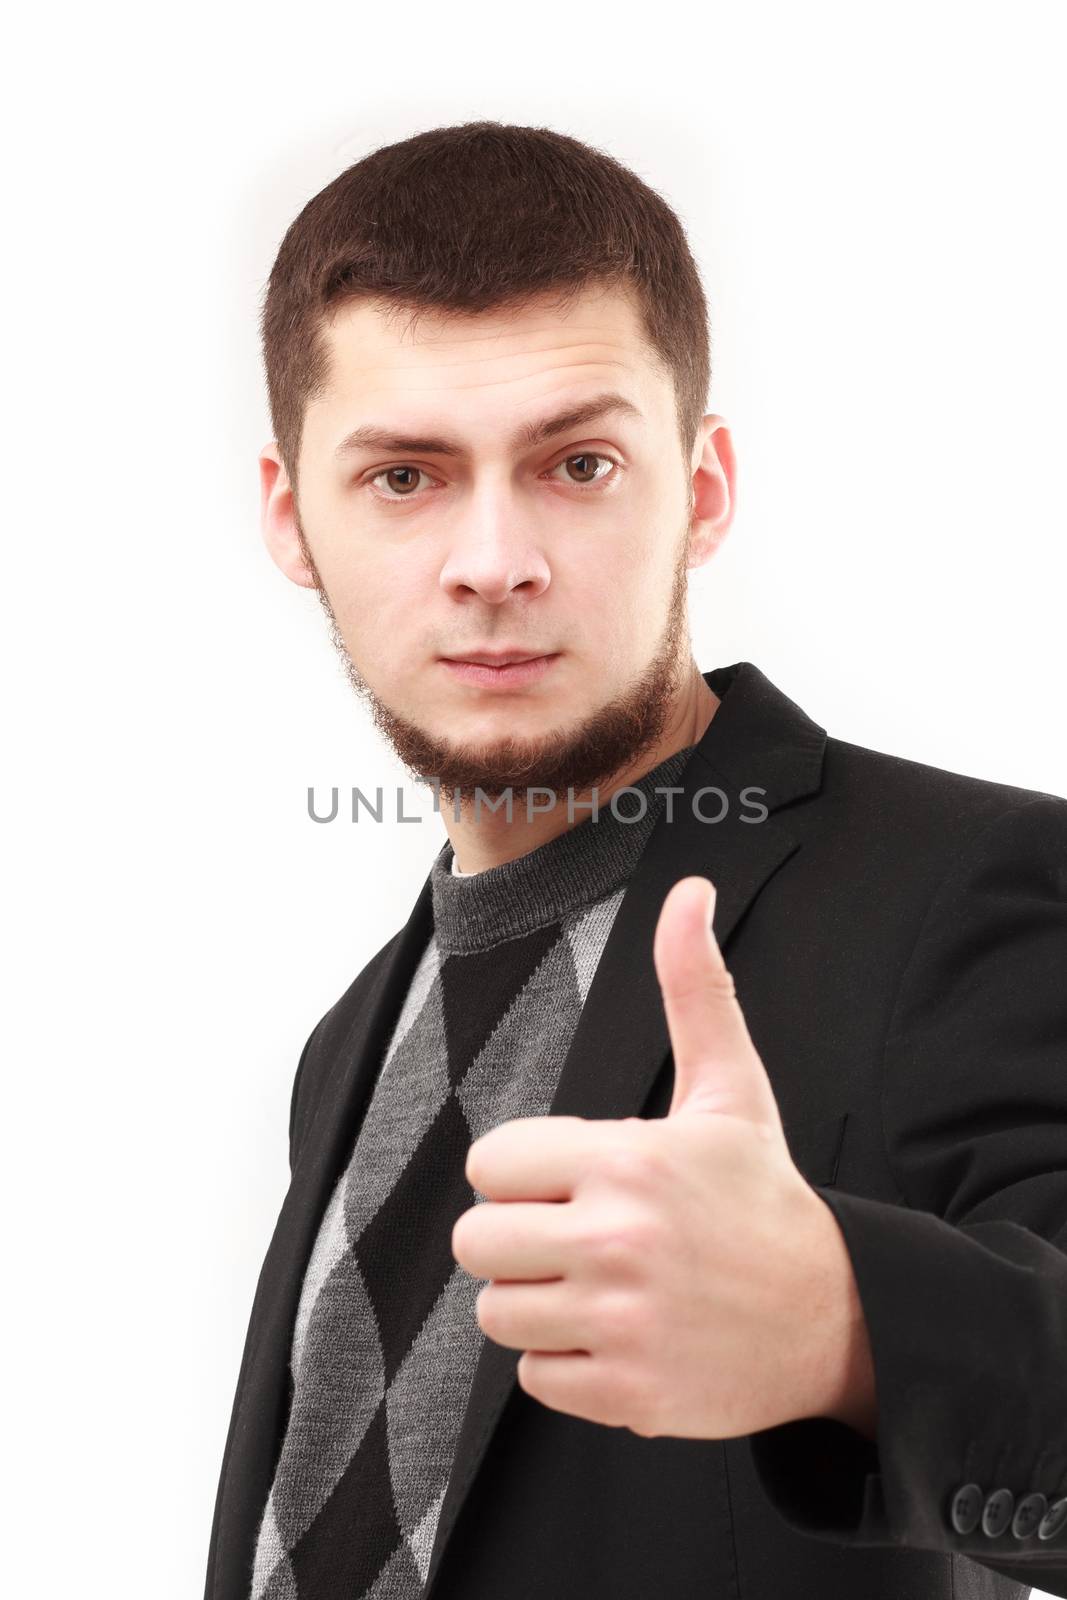 Young businessman with thumb up isolated on white